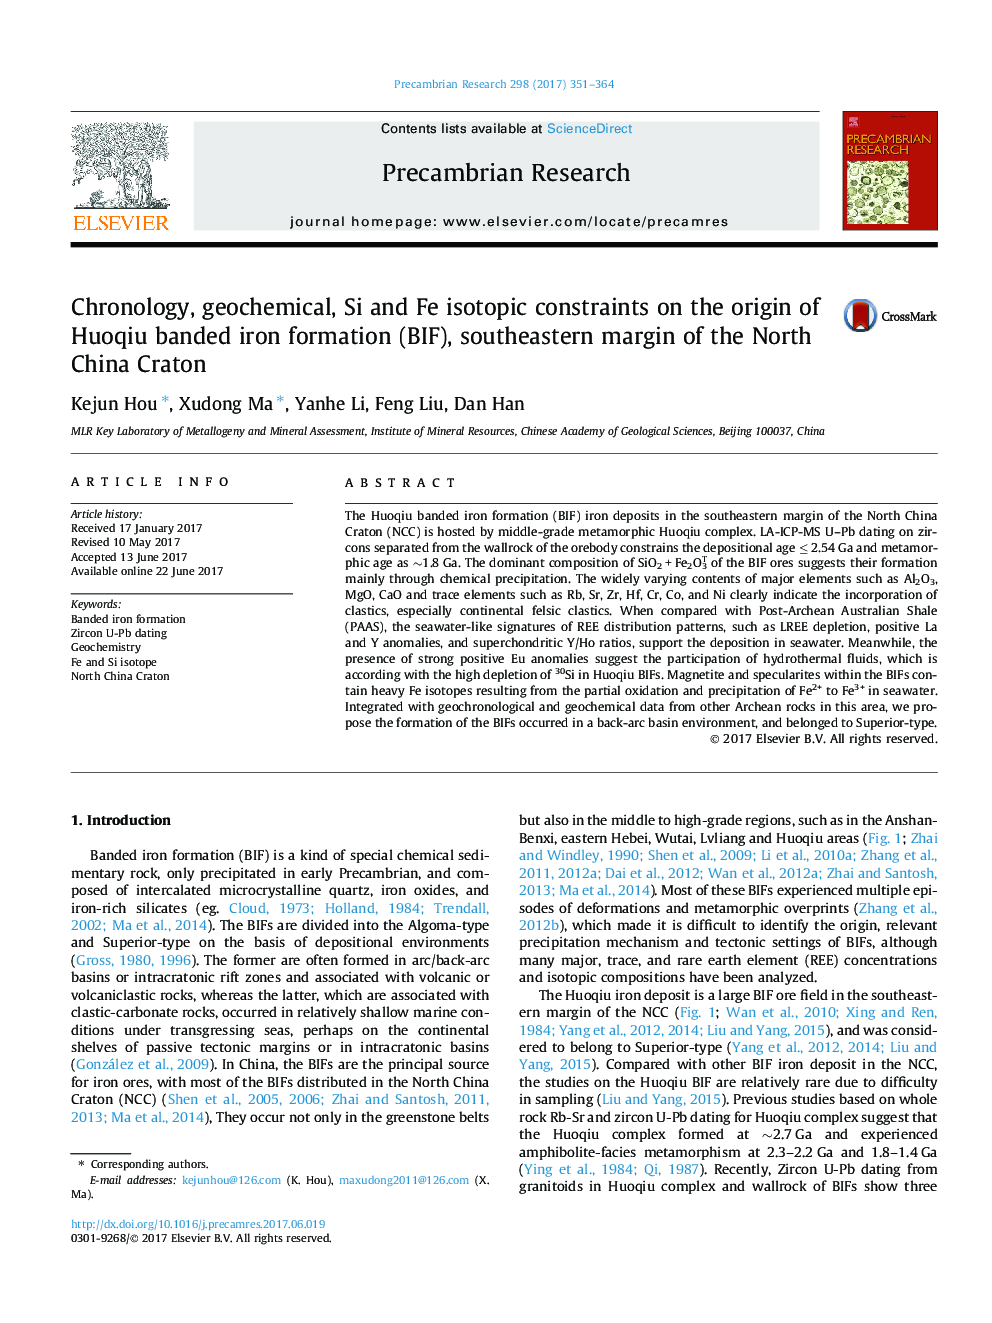 Chronology, geochemical, Si and Fe isotopic constraints on the origin of Huoqiu banded iron formation (BIF), southeastern margin of the North China Craton